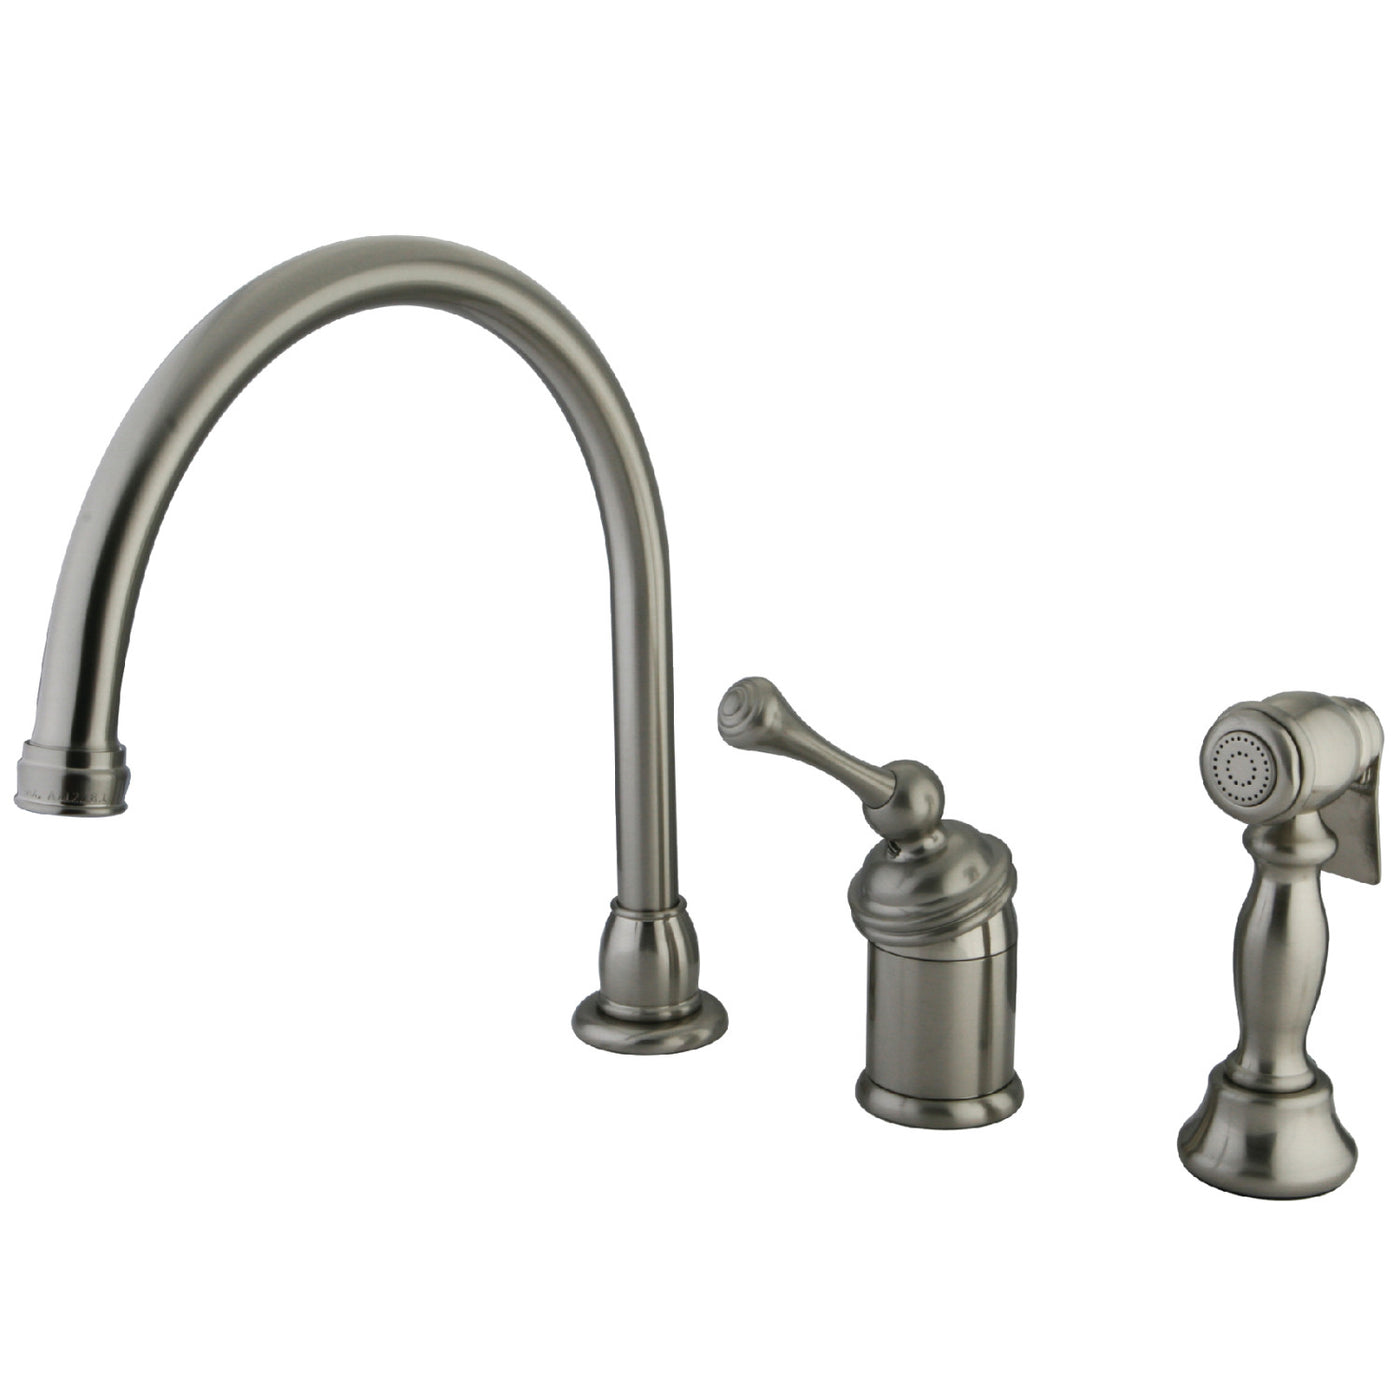 Elements of Design EB3818BLBS Single-Handle Widespread Kitchen Faucet with Brass Sprayer, Brushed Nickel